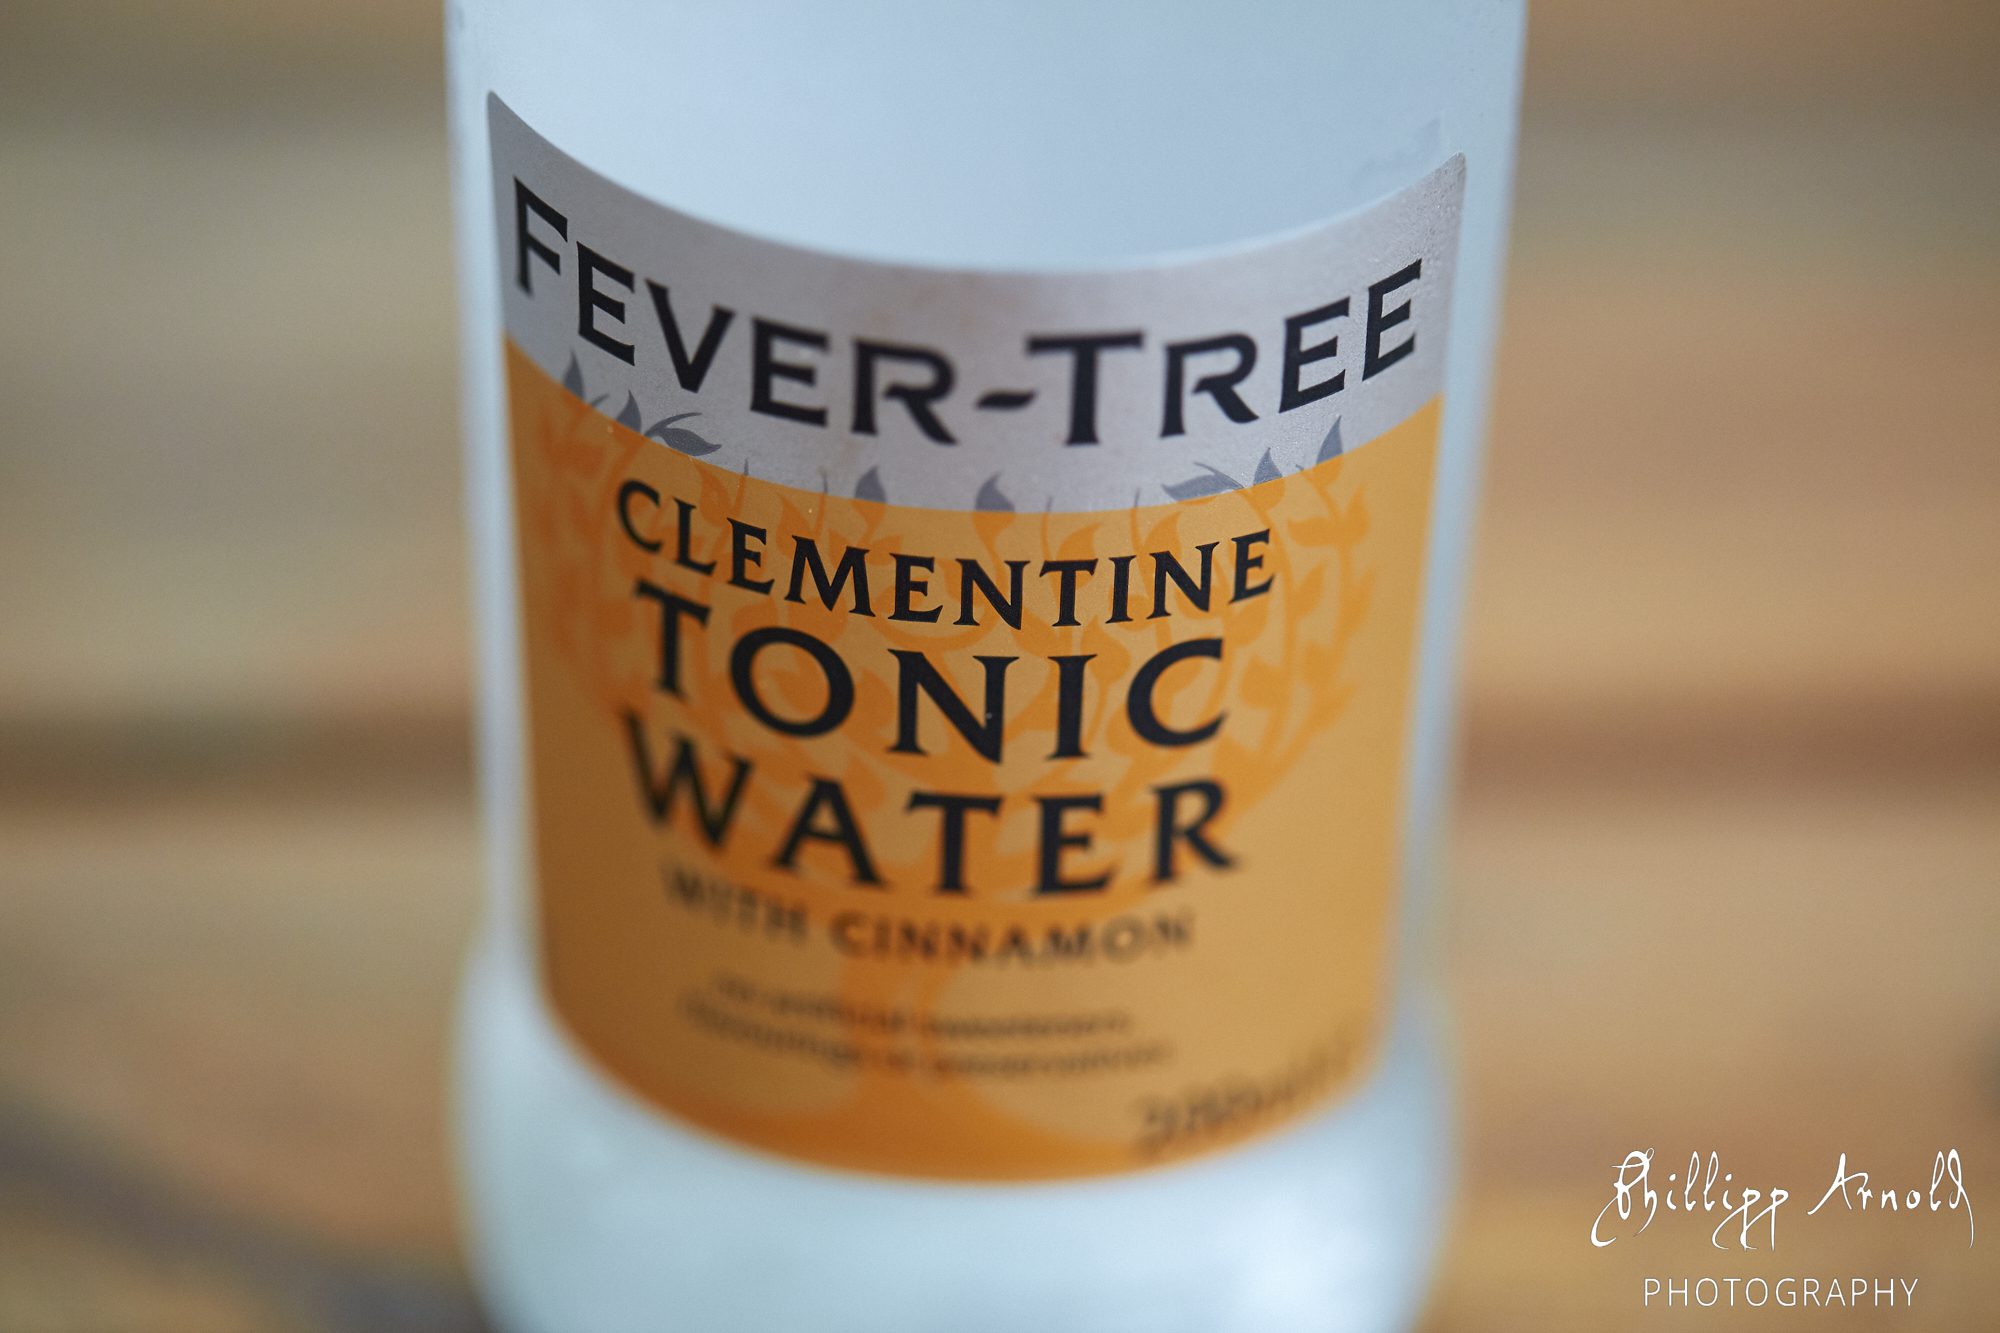 Tonic Water - FEVER-TREE Clementine